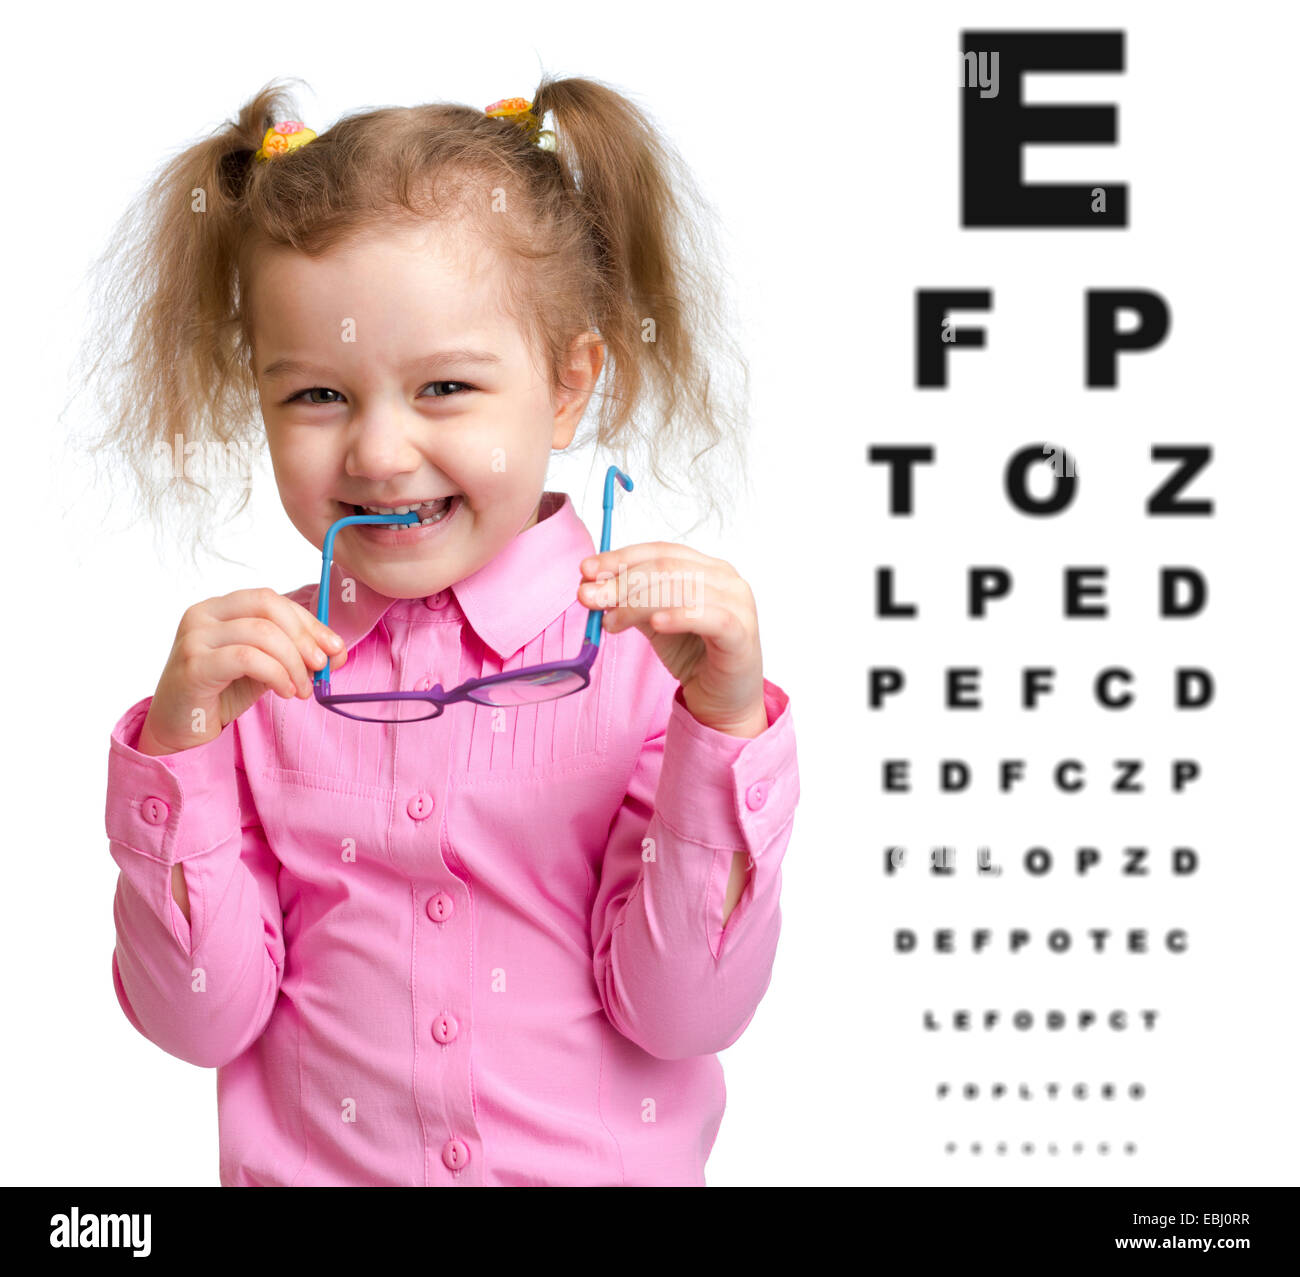 Smiling girl took off glasses with blurry eye chart behind her Stock Photo